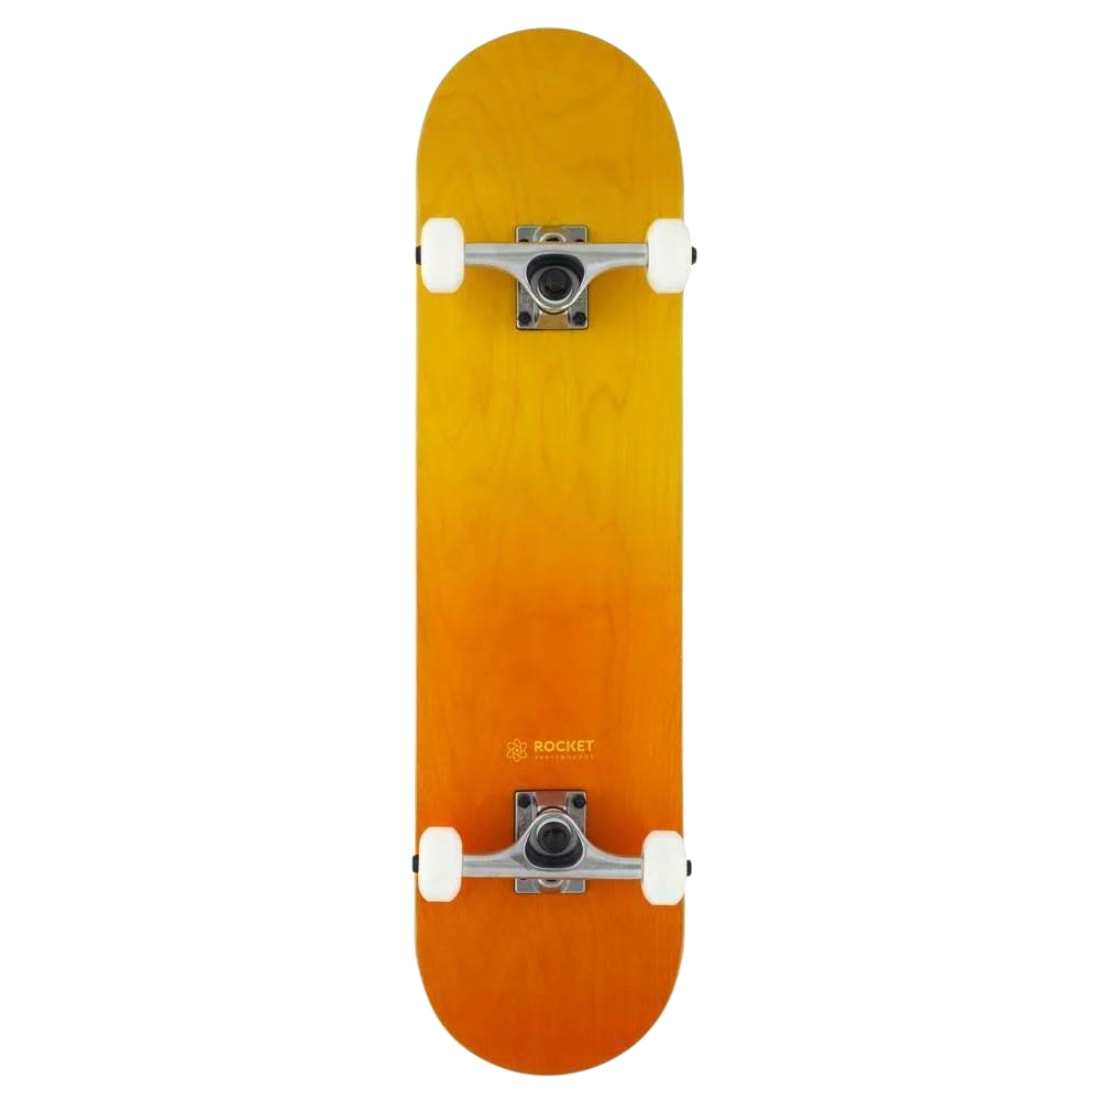 Rocket Skateboards 8.0" Double Dipped Complete Skateboard - Orange - Complete Skateboard by Rocket Skateboards 8.0 inch